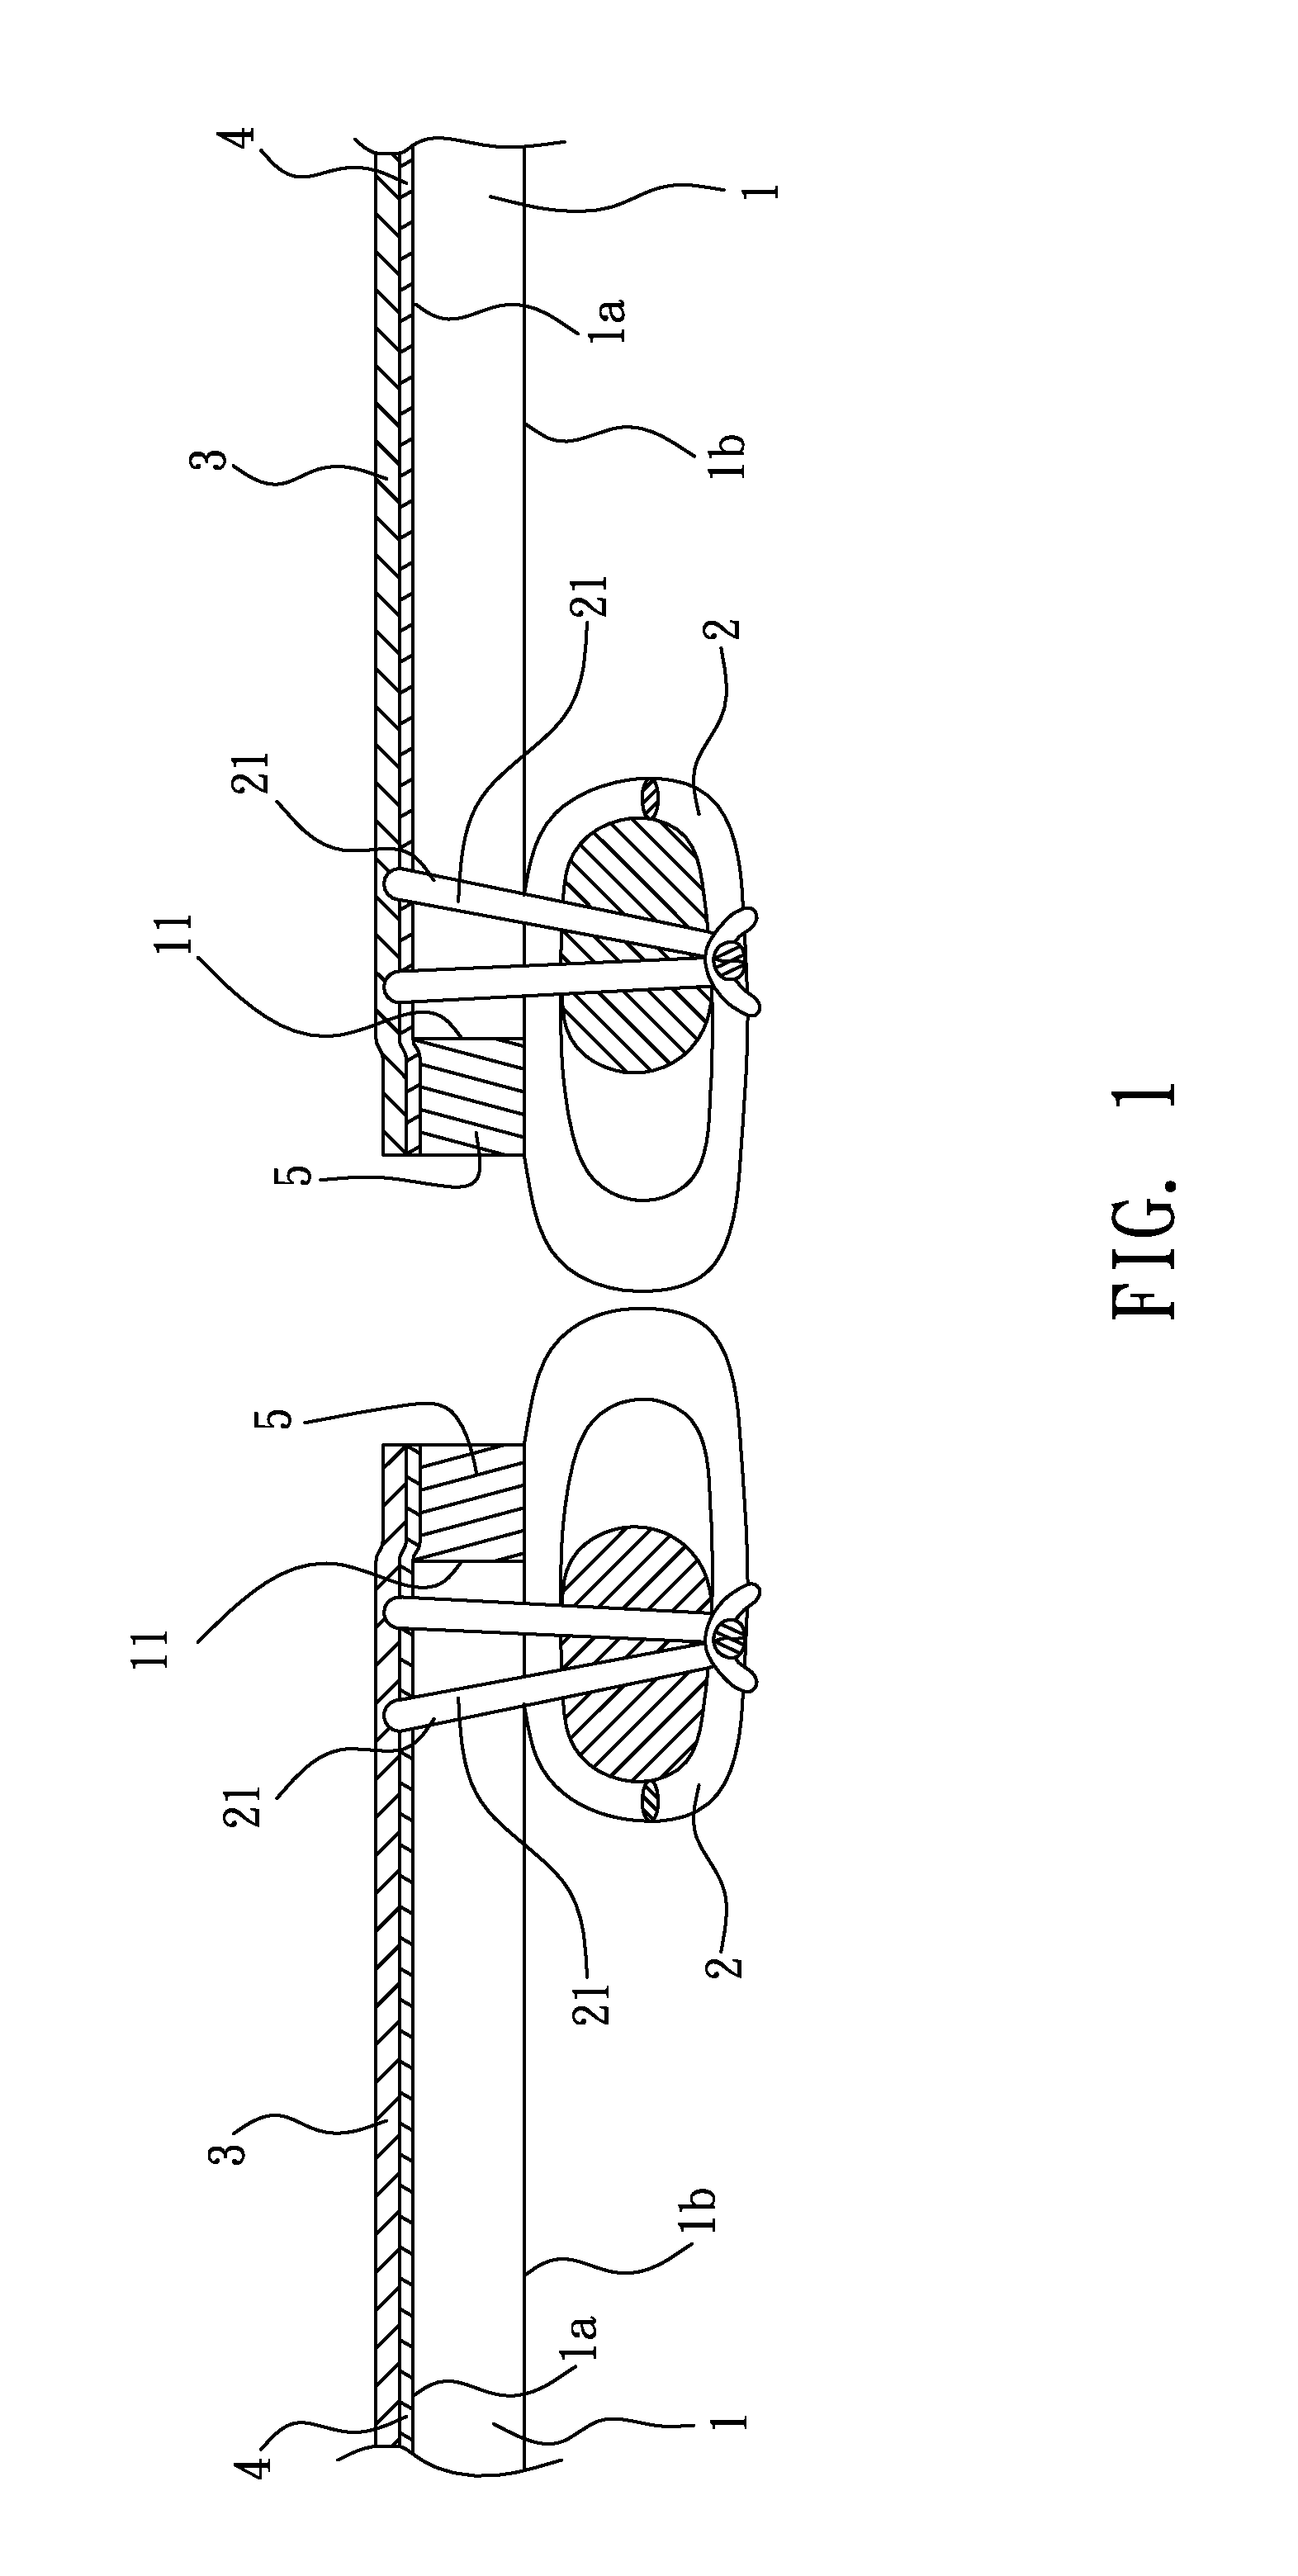 Continuous-coil type waterproof slide fastener and the structure impervious to fluid thereof